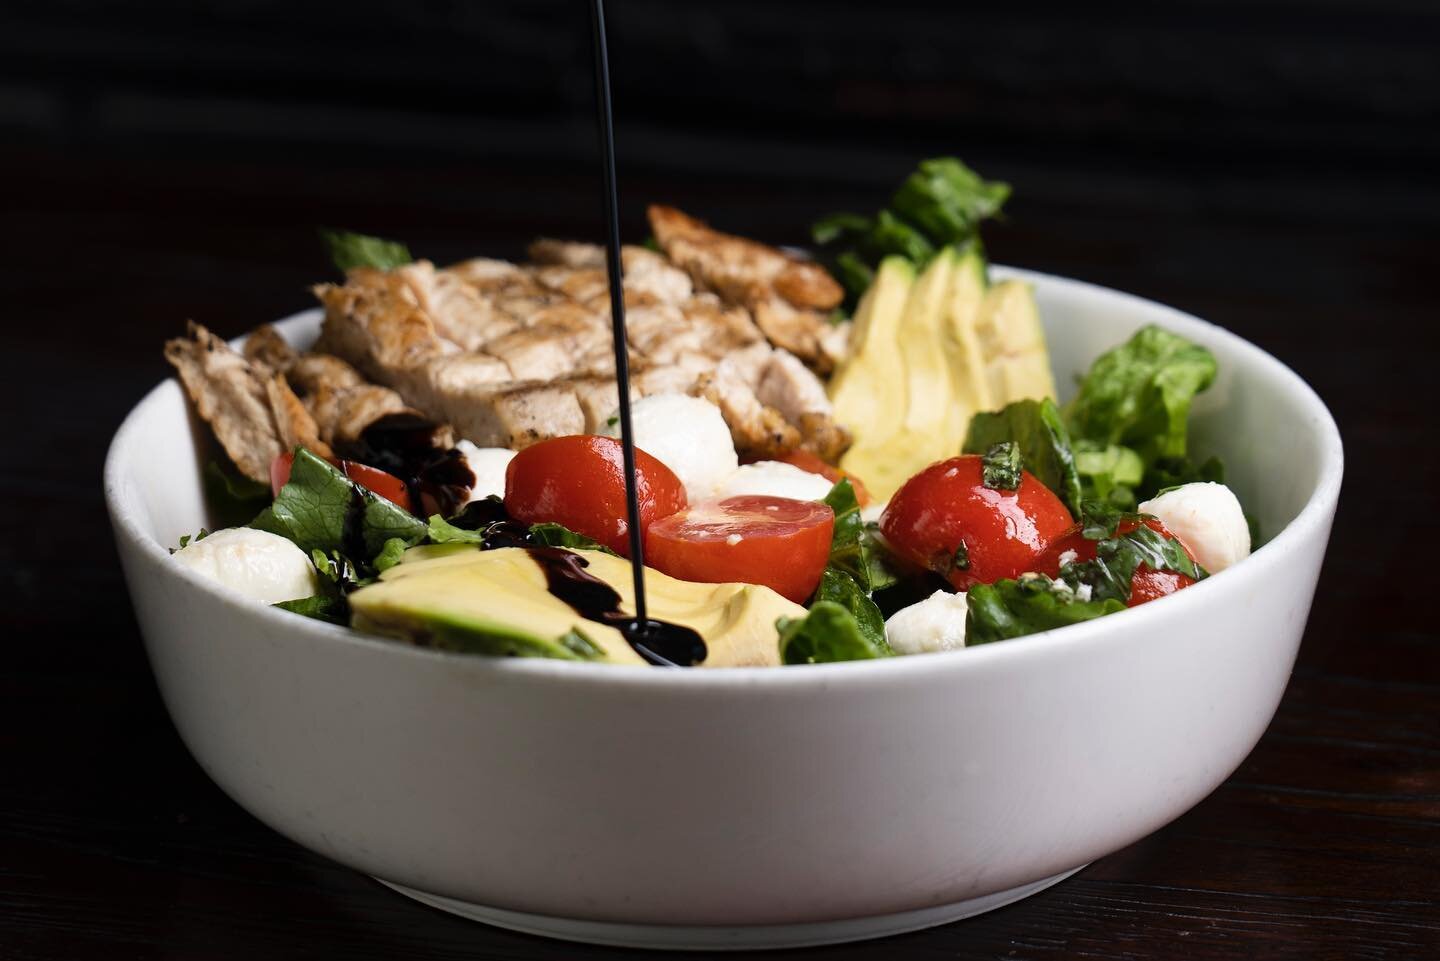 Have you tried our new Caprese Salad? Crisp lettuce, grilled chicken, fresh mozerella, cherry tomatoes, basil, and avocado drizzled in our homemade balsamic vinaigrette dressing. Today we are open from 4-9pm with indoor/outdoor dining and online orde